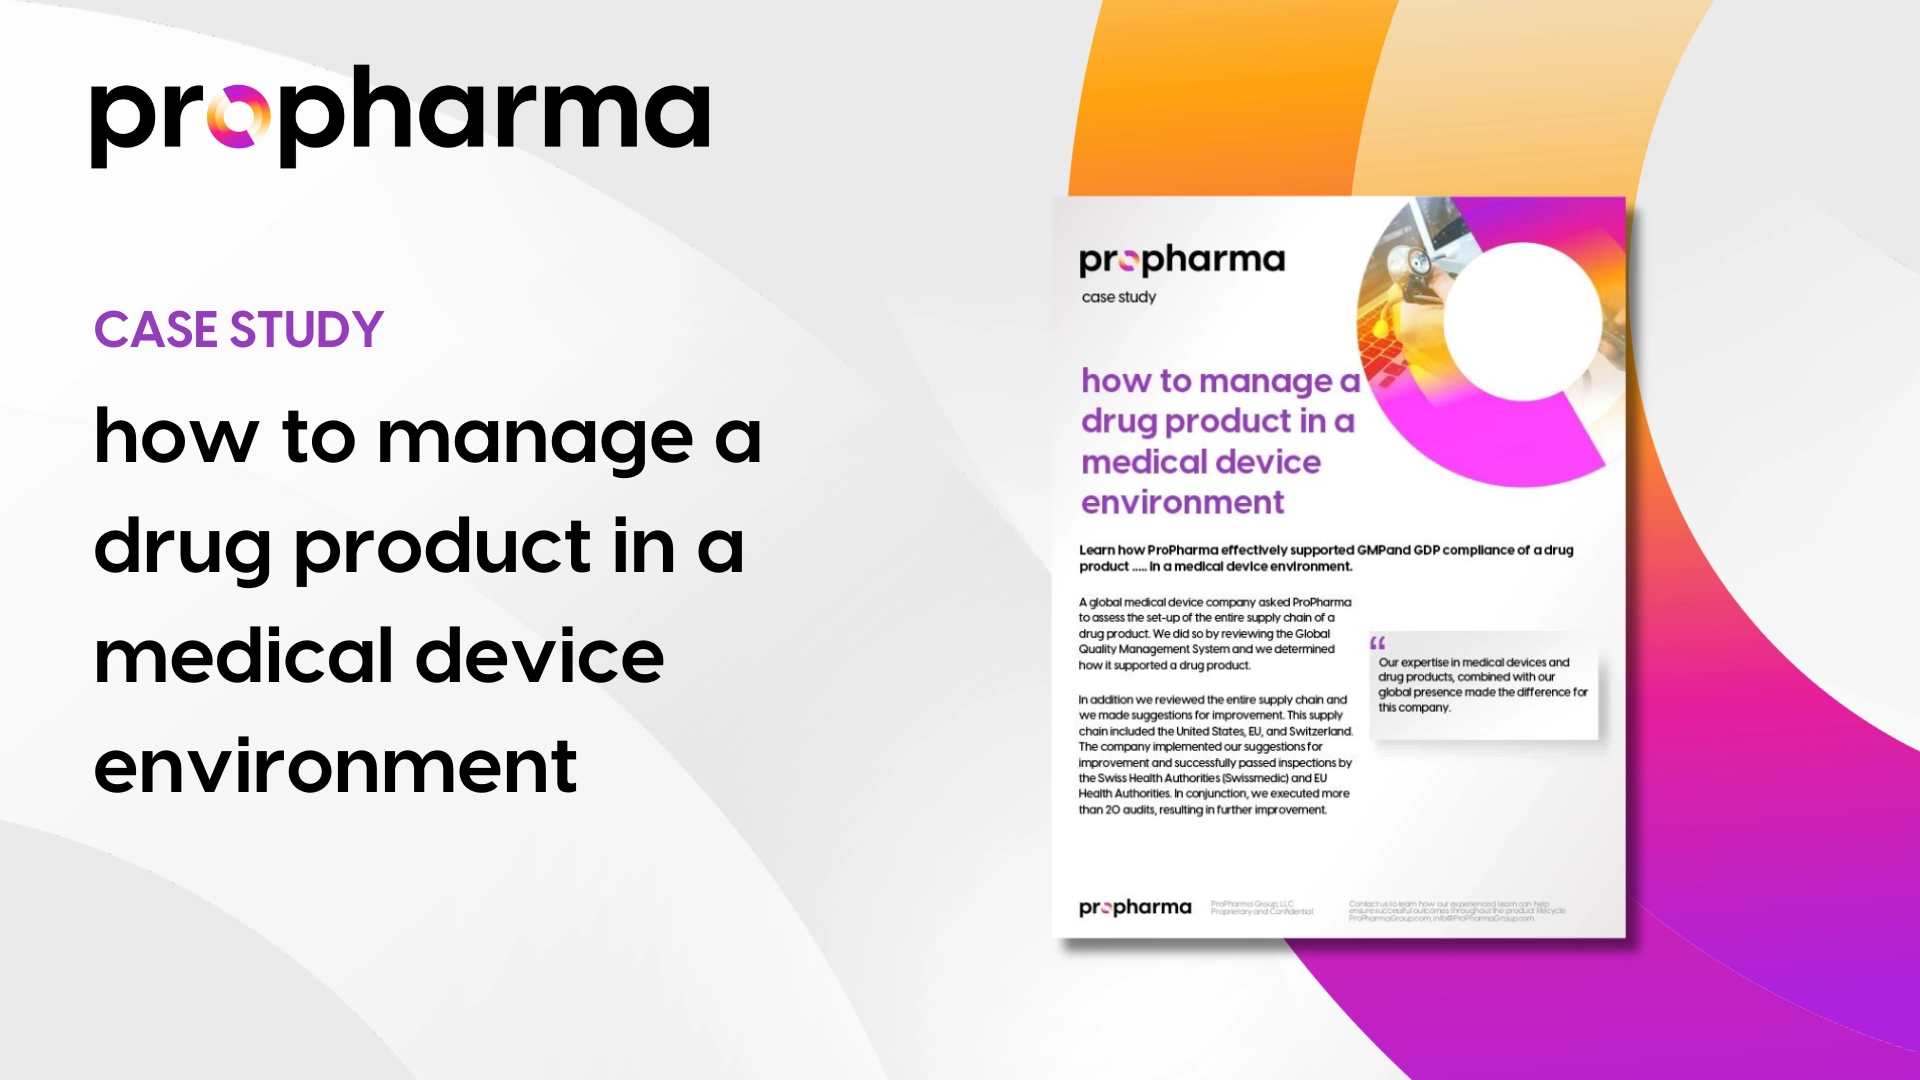 How to Manage a Drug Product in a Medical Device Environment